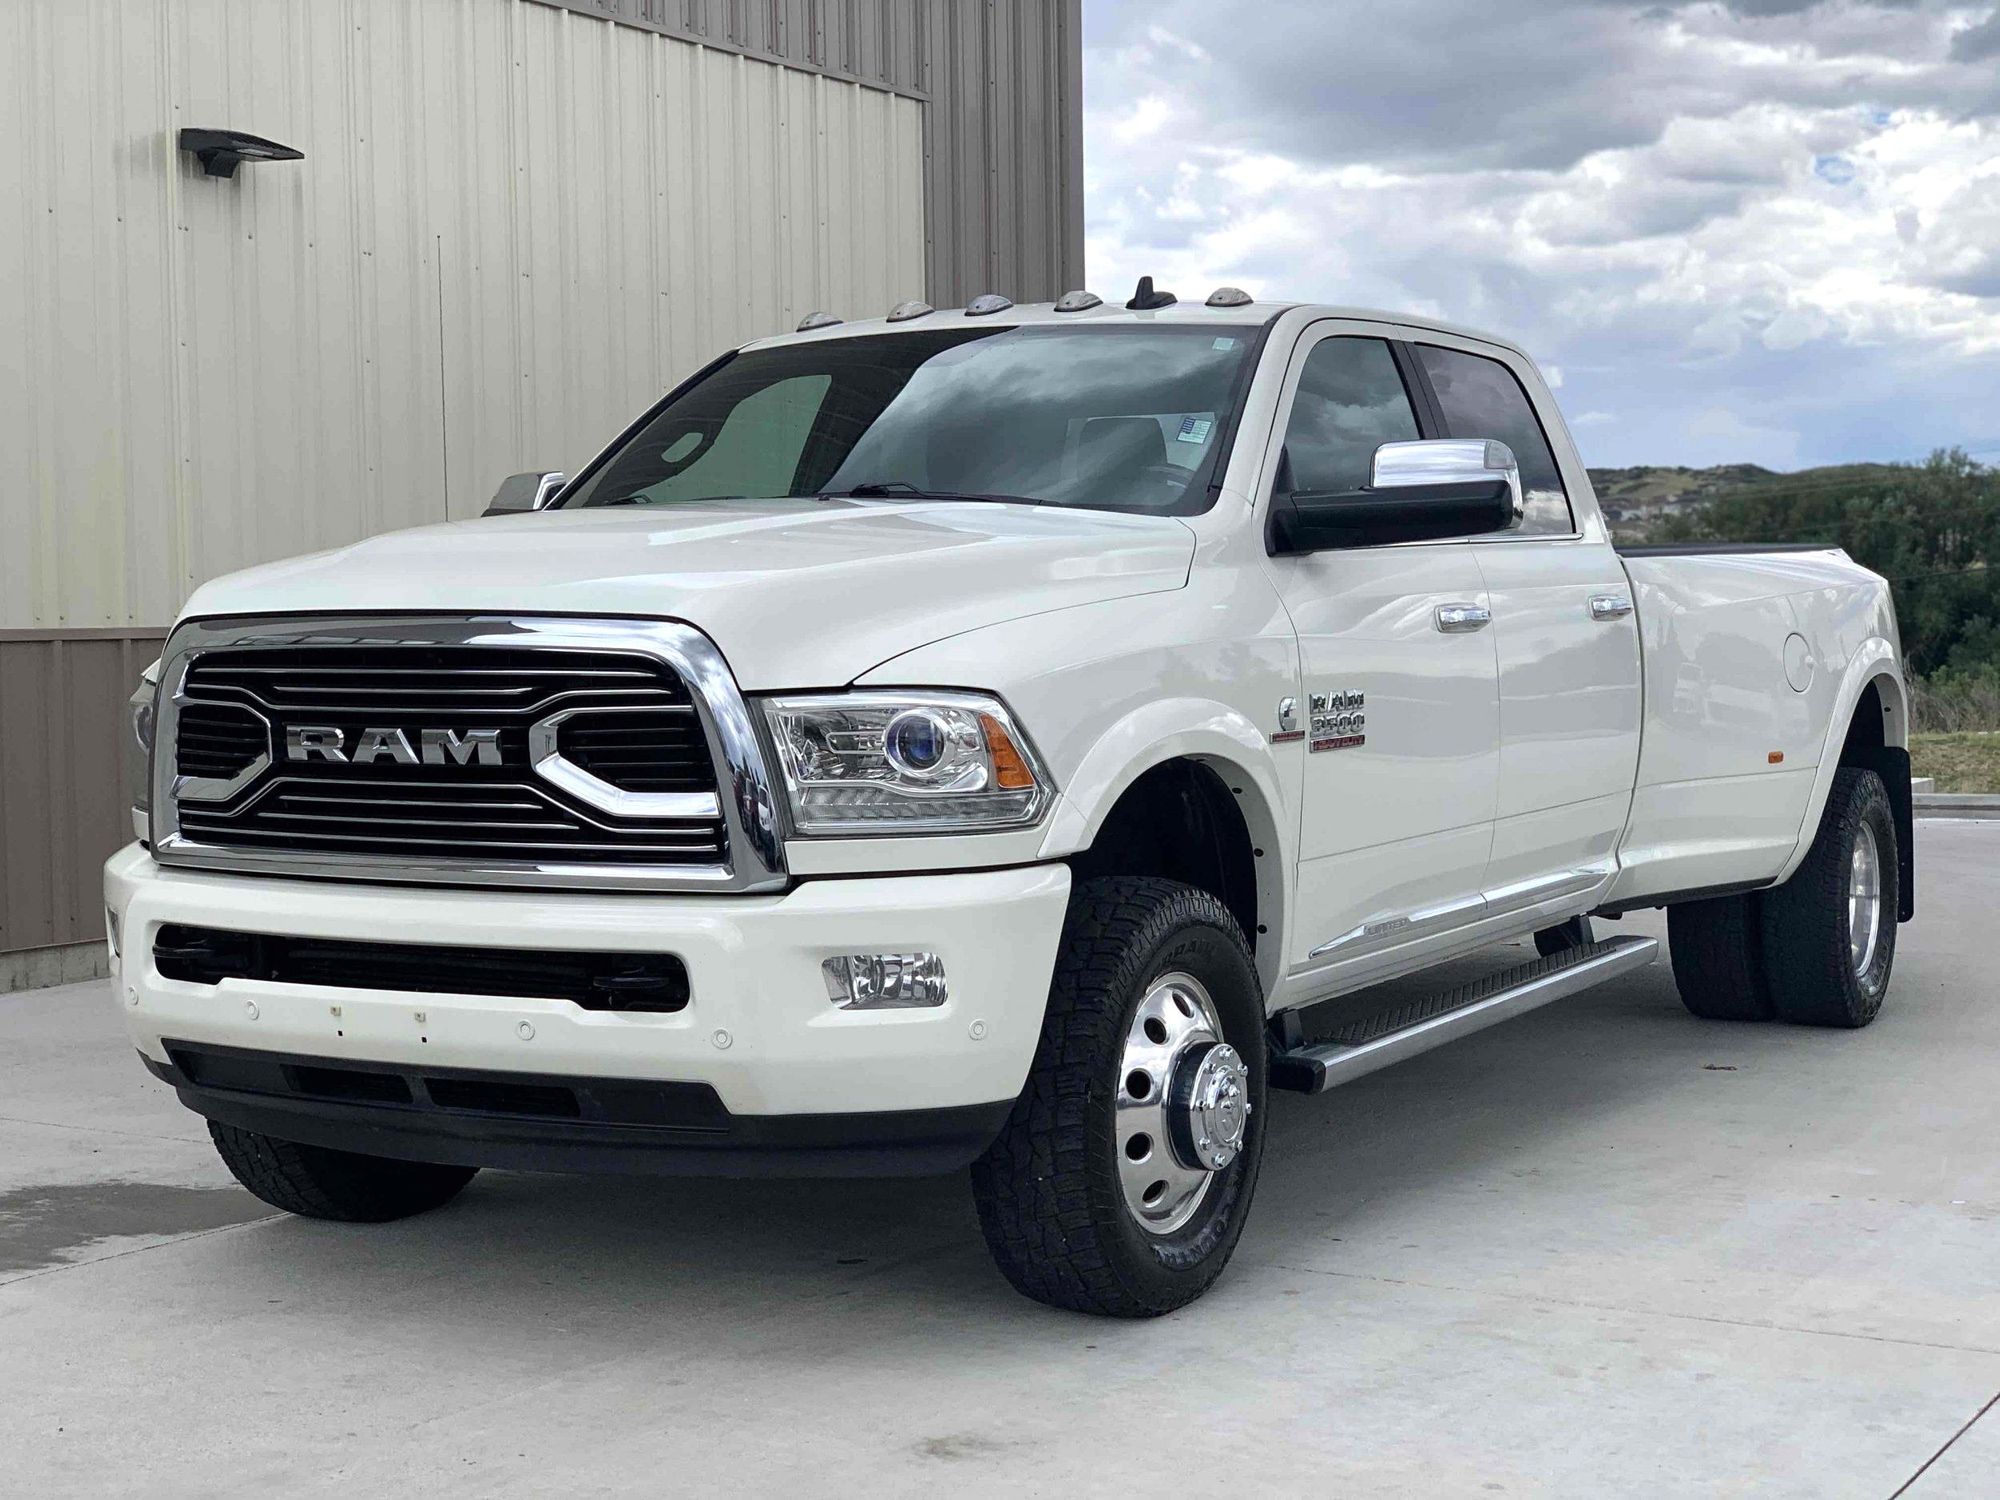 Ram 3500 Monthly Payment